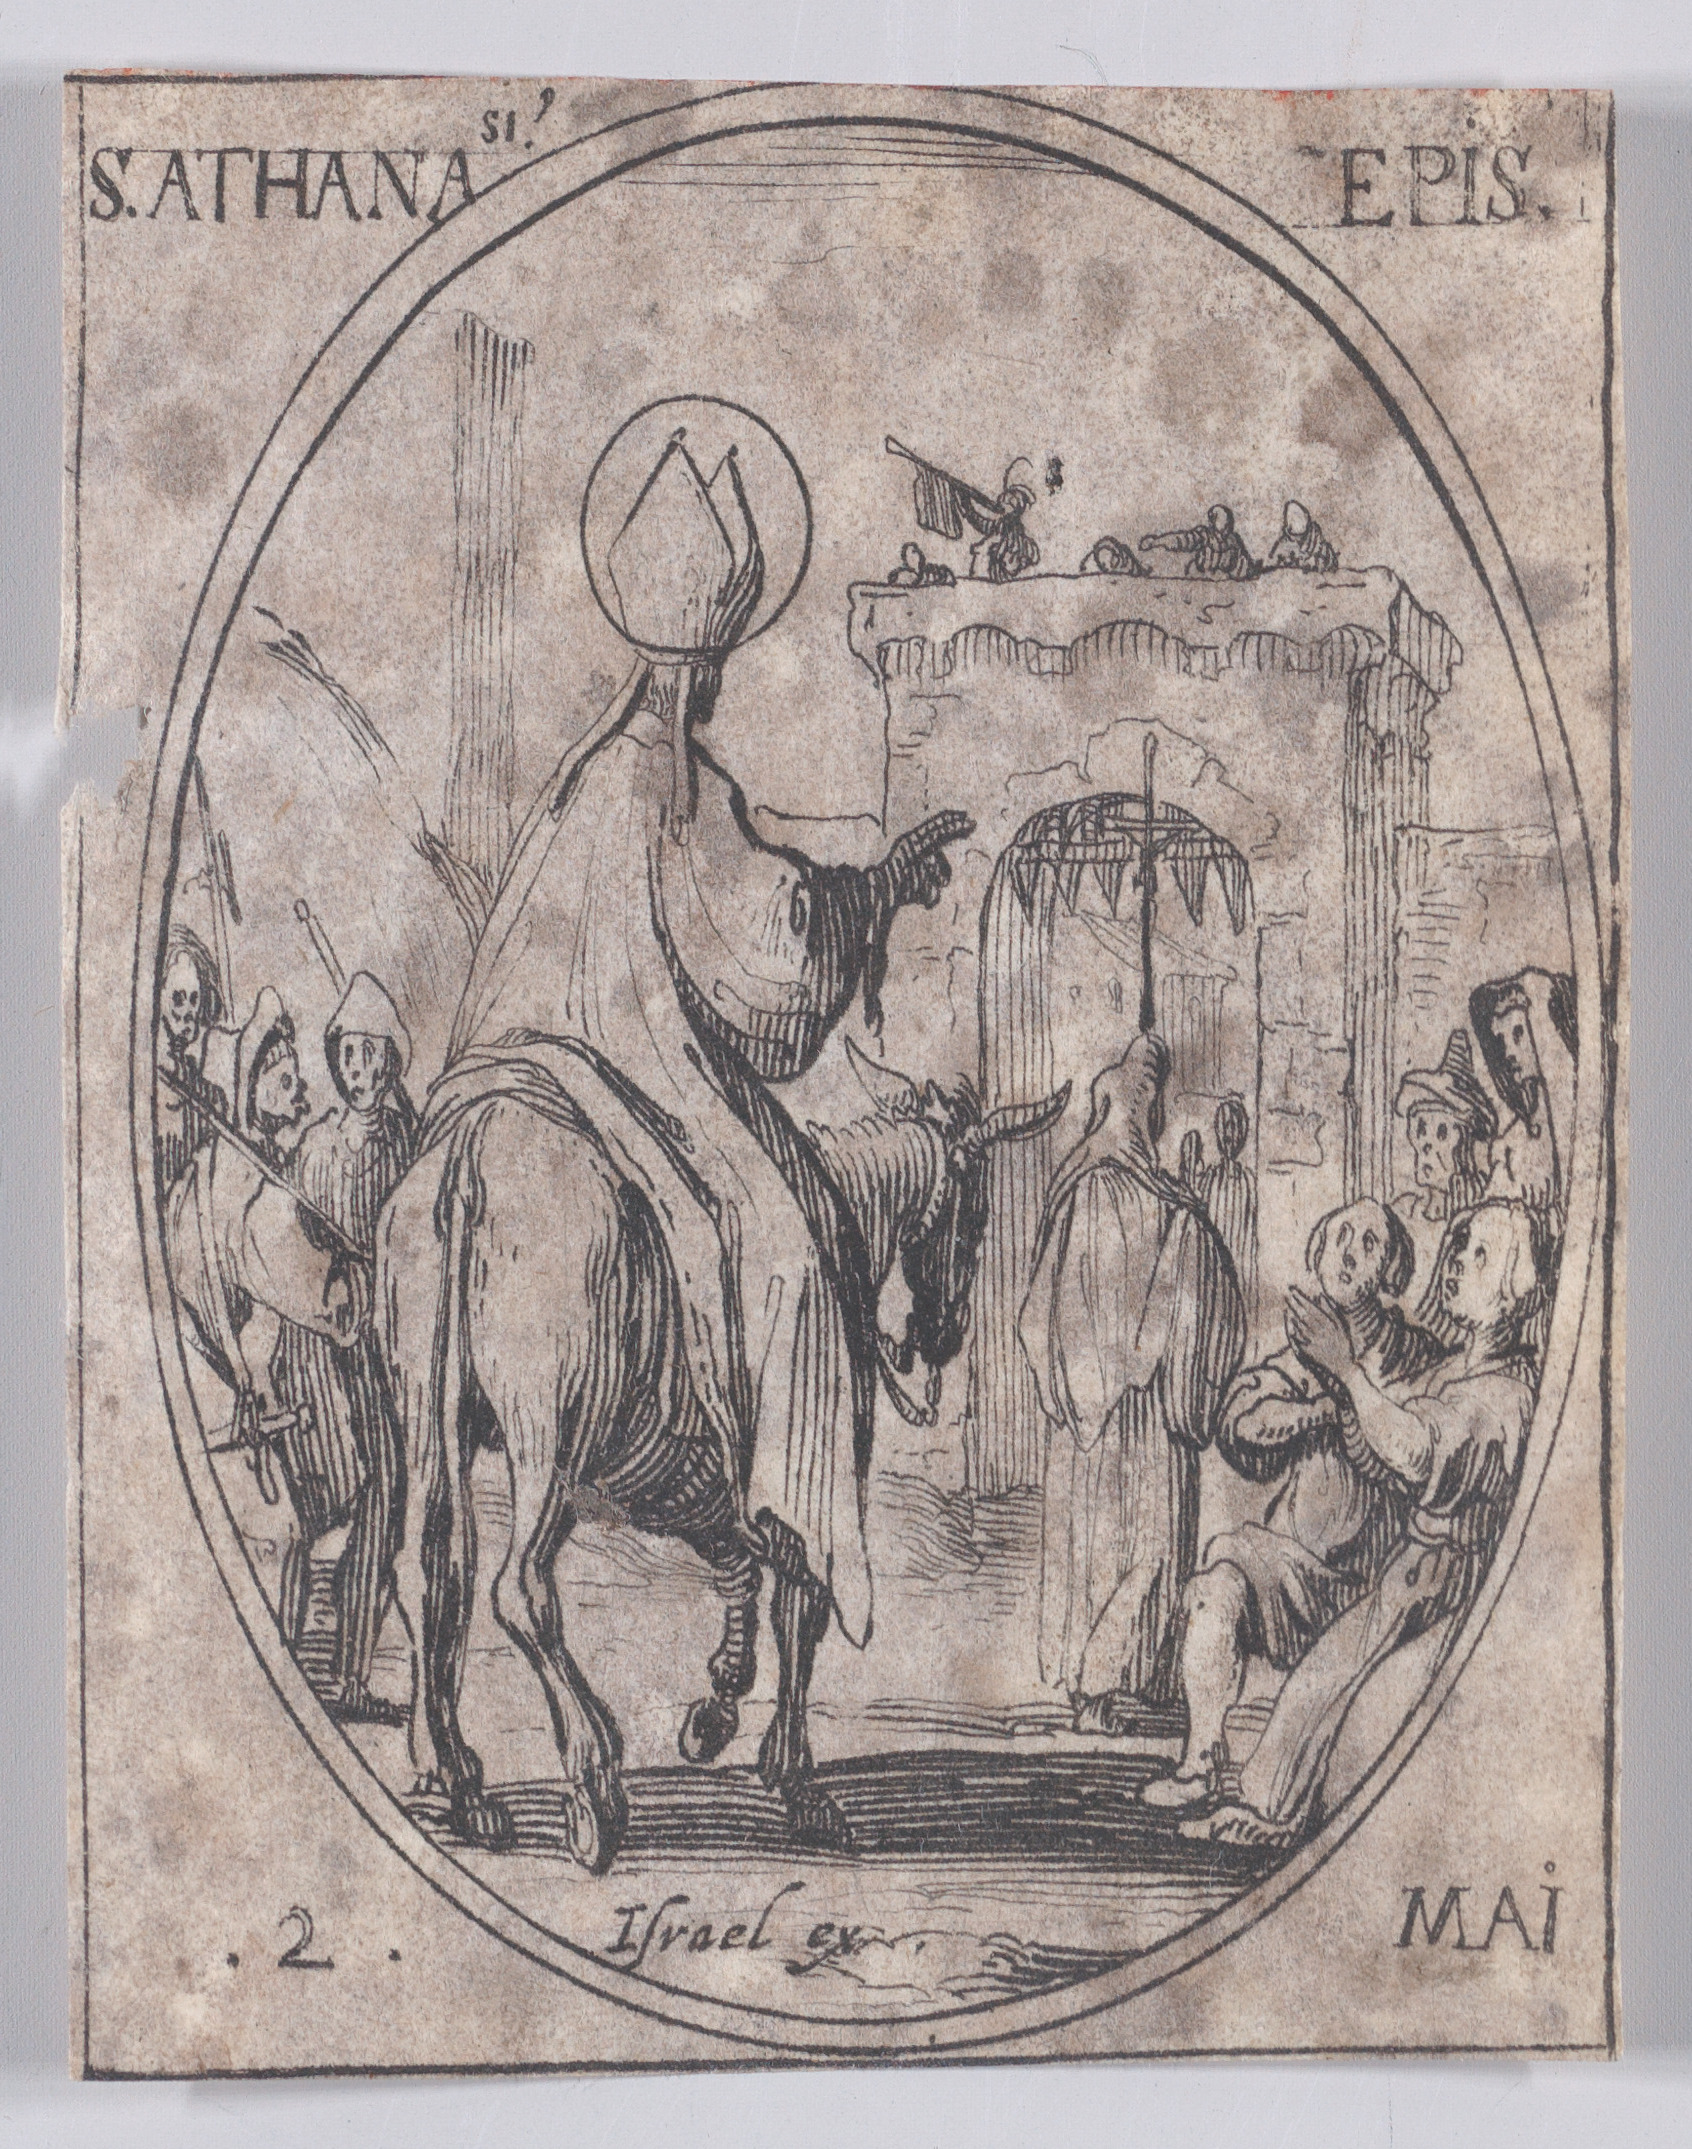 S. Athanase, évêque (St. Athanasius, Bishop), May 2nd, from Les Images De Tous Les Saincts et Saintes de L'Année (Images of All of the Saints and Religious Events of the Year), Jacques Callot (French, Nancy 1592–1635 Nancy), Etching; second state of two (Lieure)